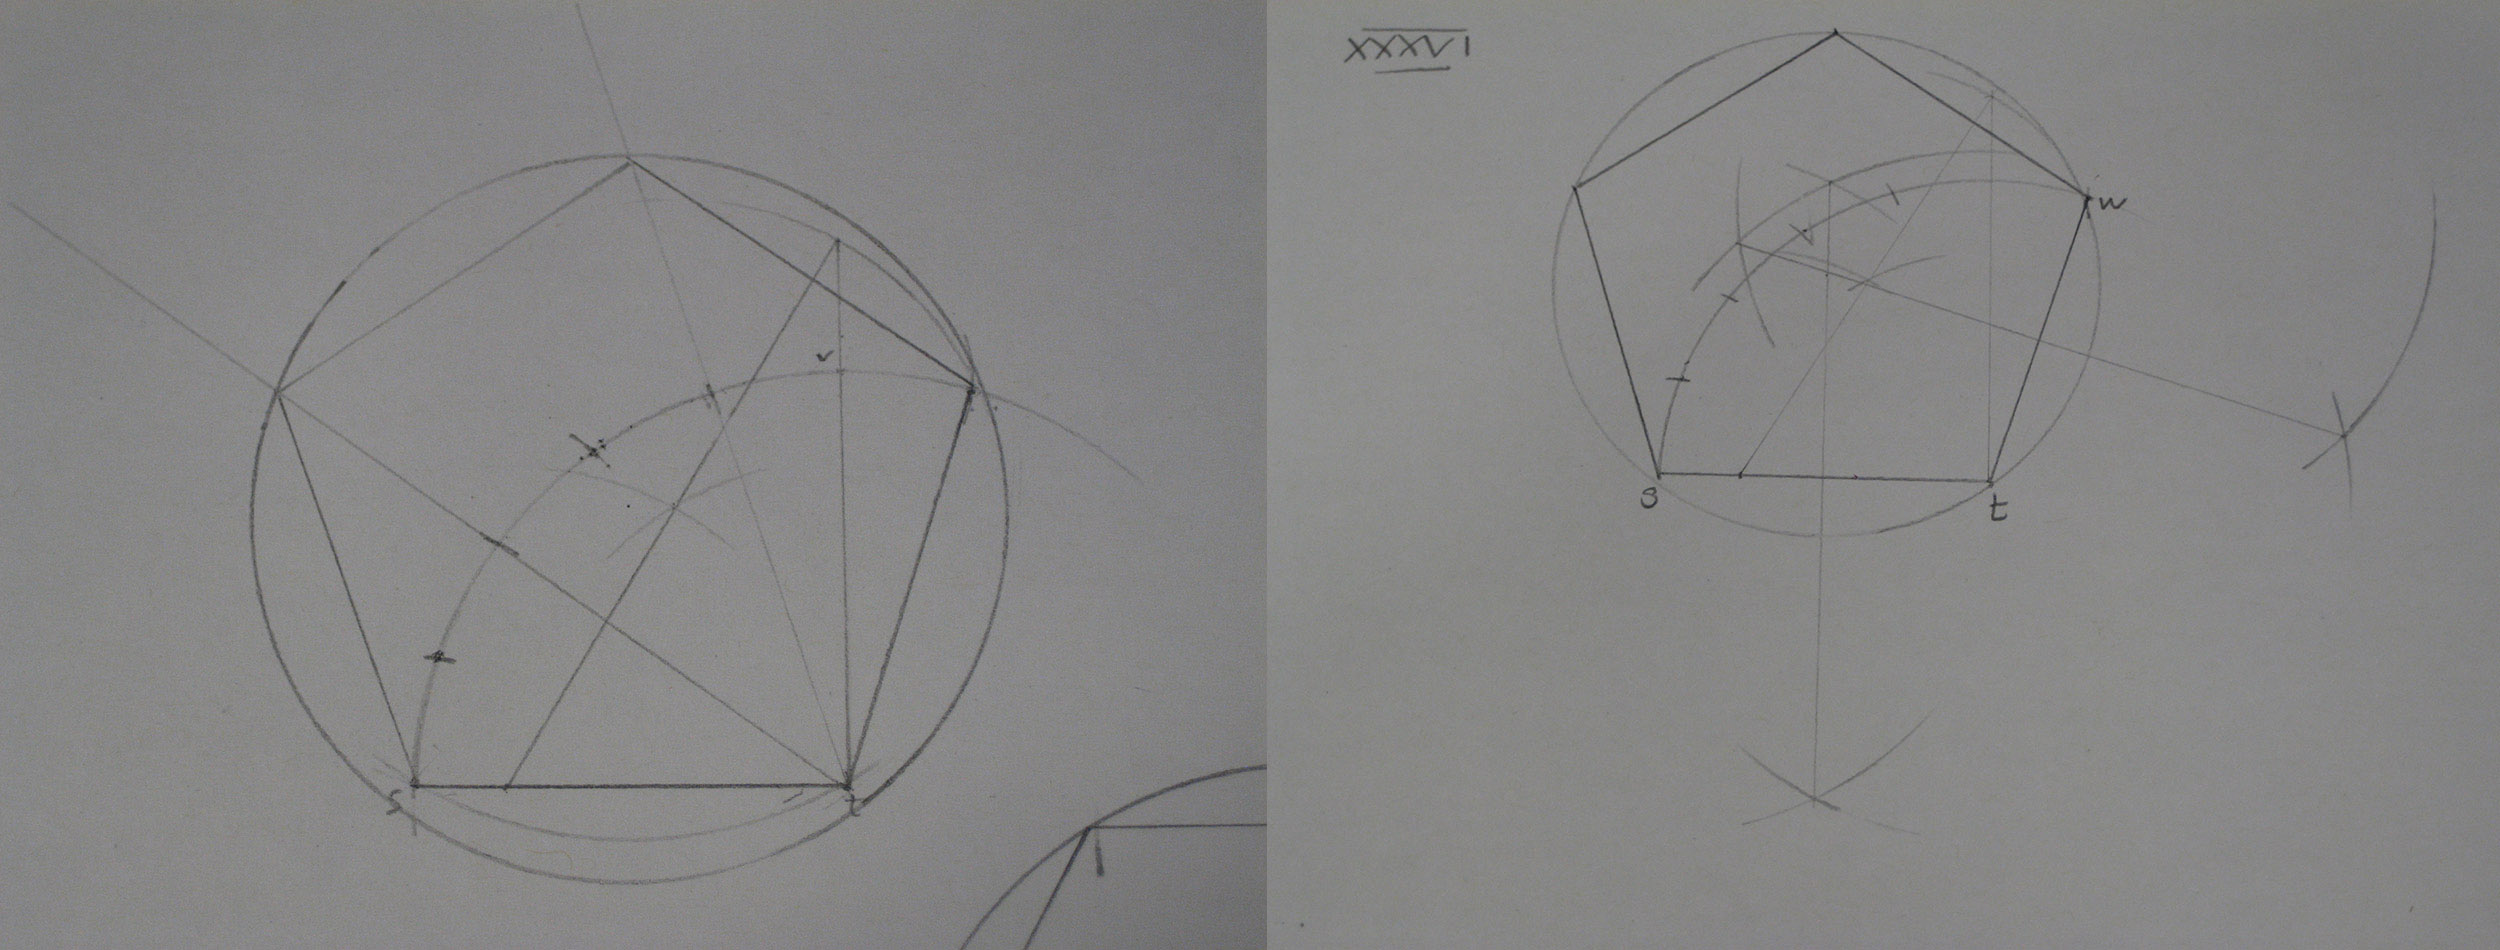 On the left, my attempt at drawing the pentagon before I’d read exercise 35 (the circle was drawn in afterwards, but I failed to locate the centre point), and on the right my attempt afterwards, where the arches to locate the centre of the circle can be seen.